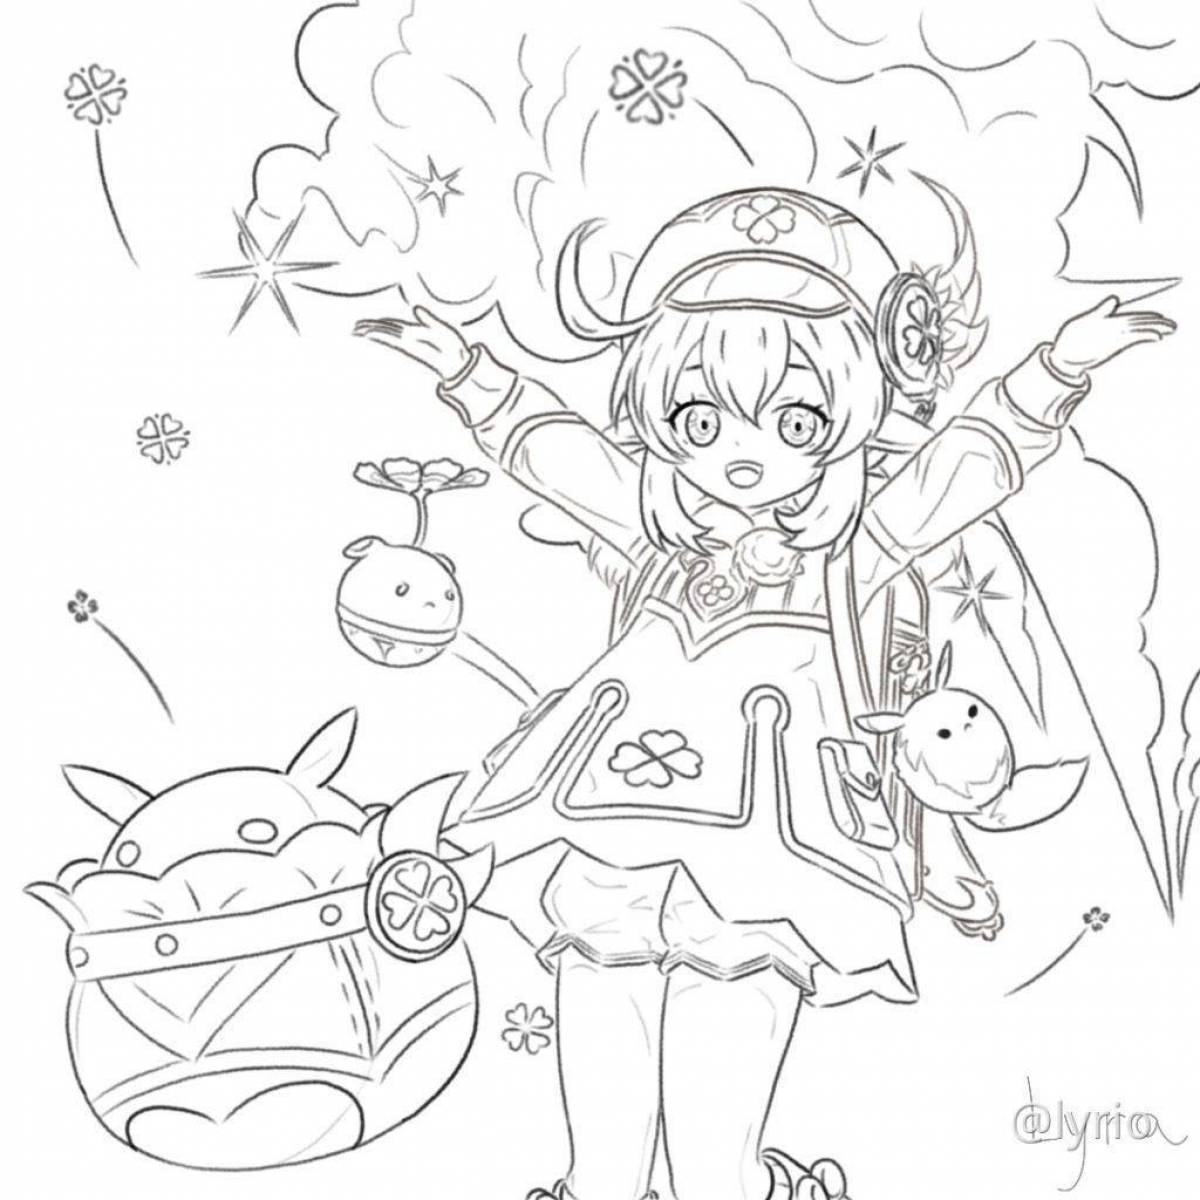 Coloring page cheerful genshin